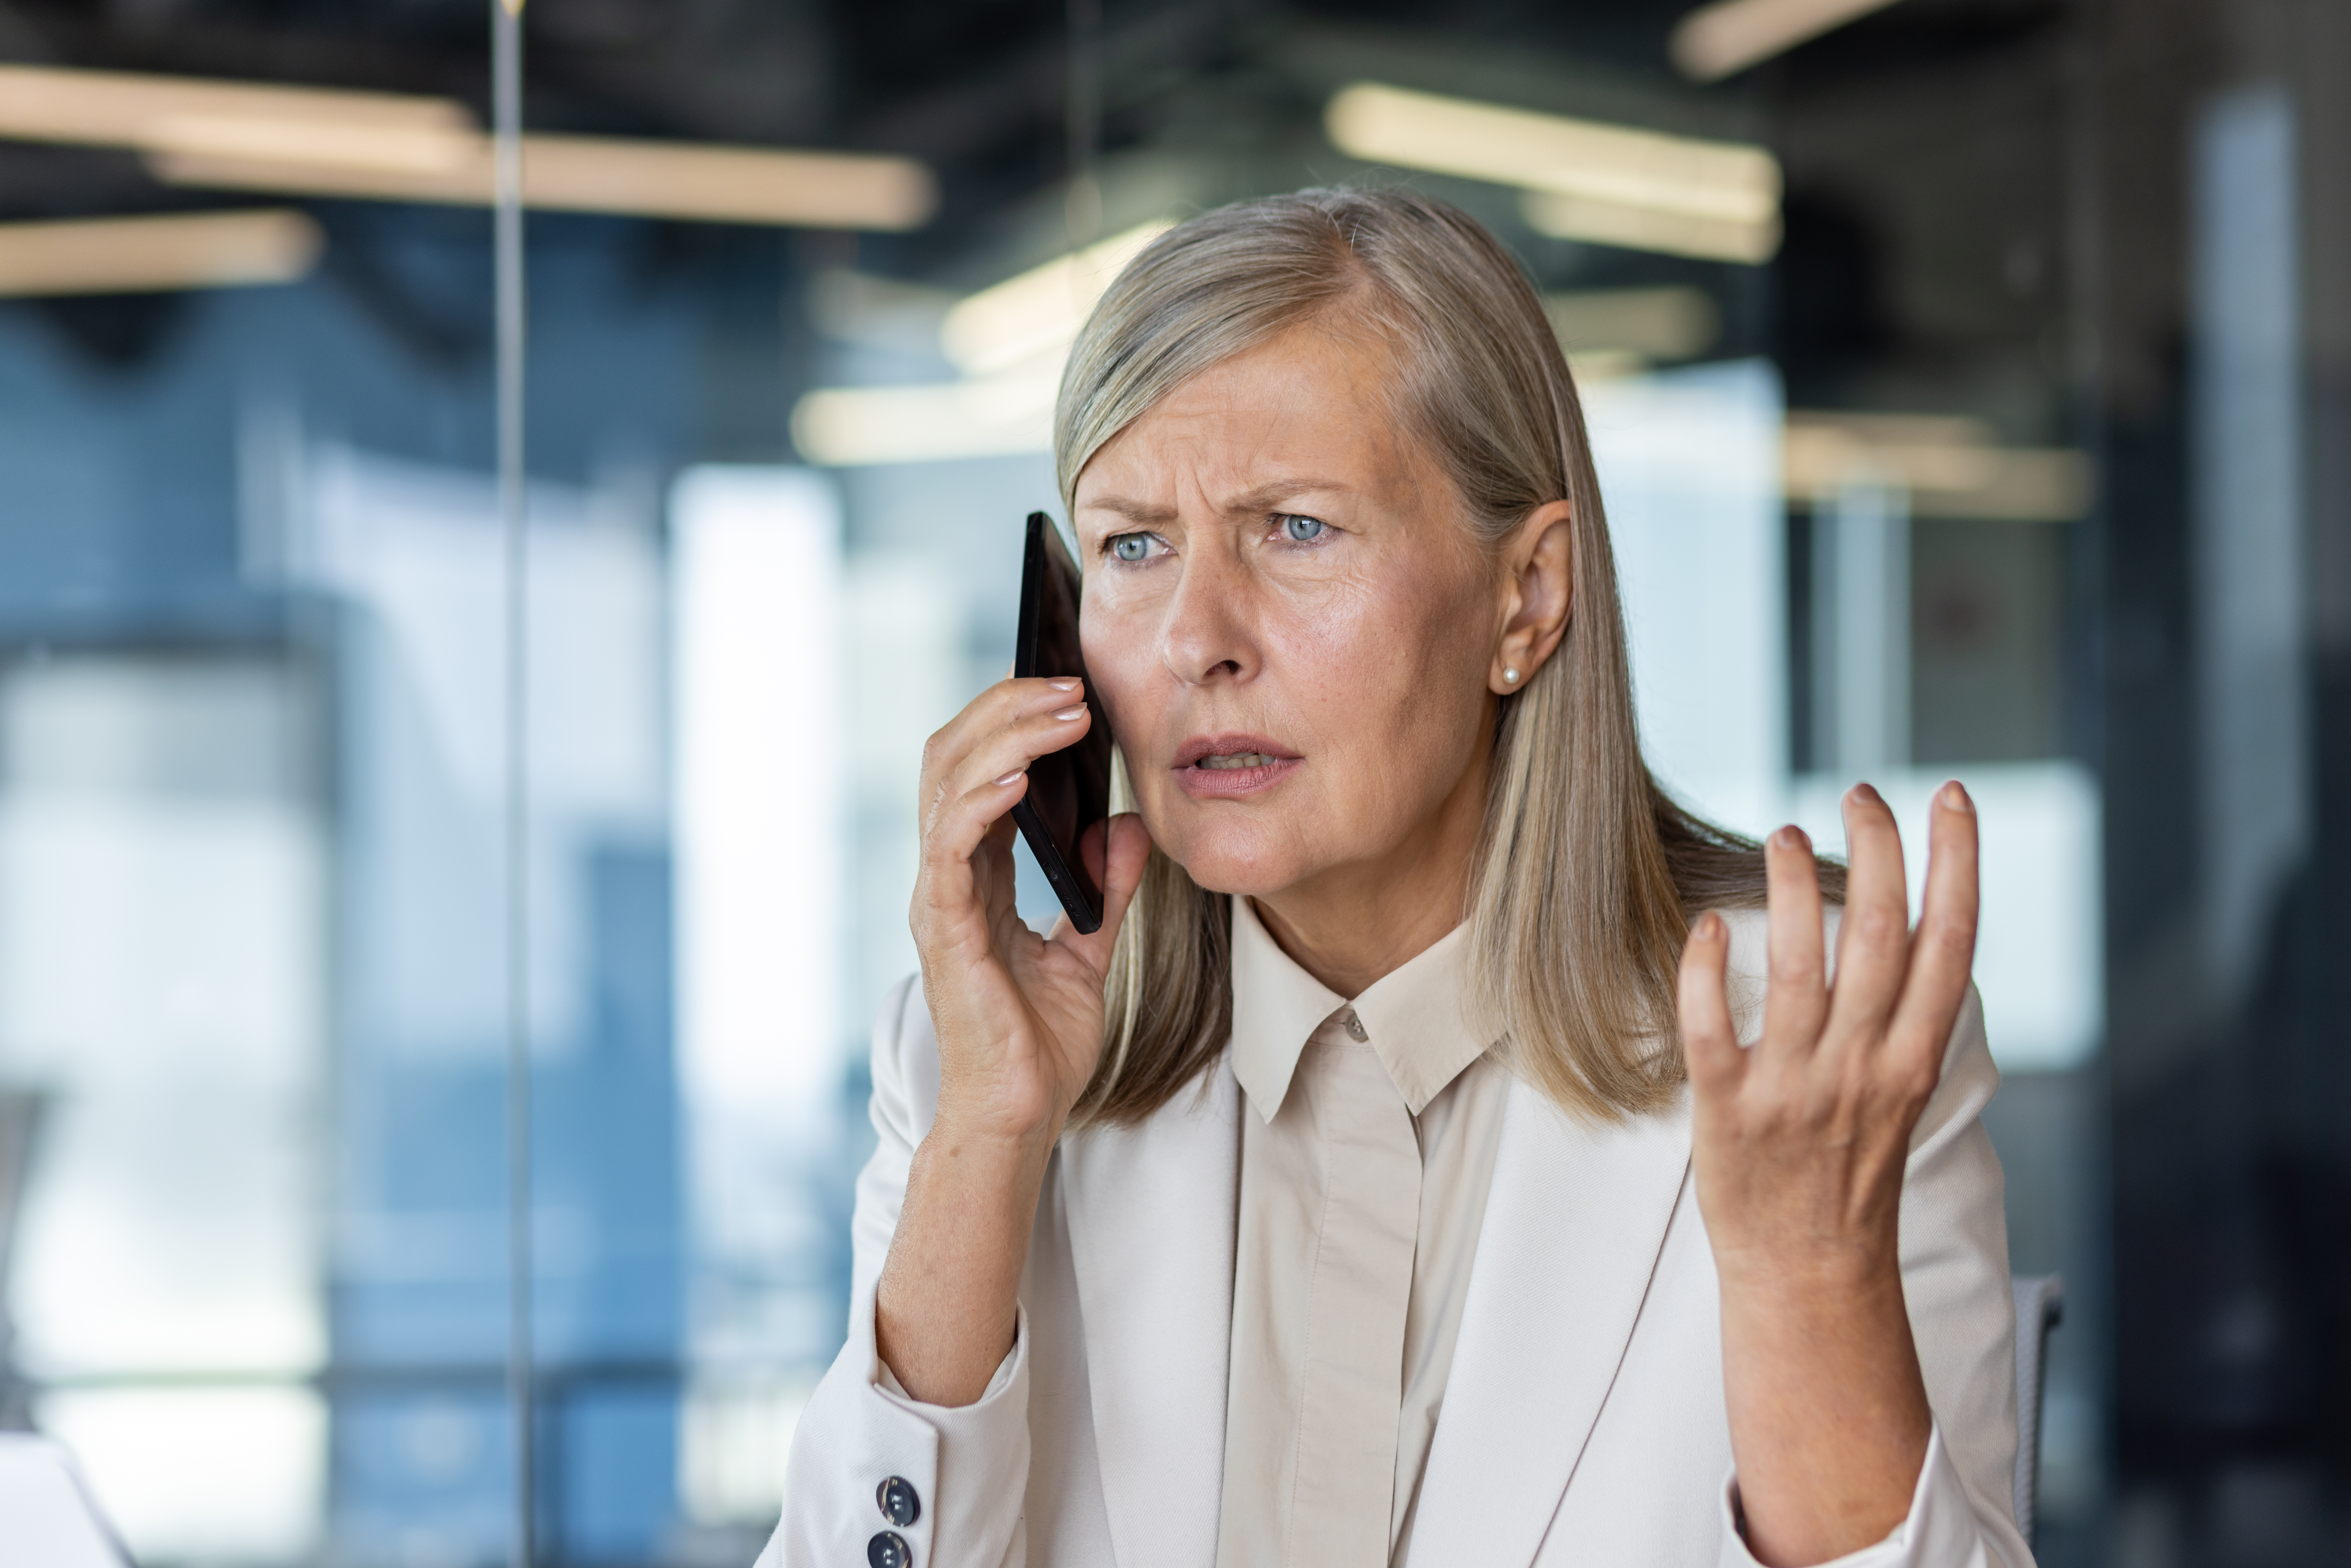 An angry woman on the phone | Source: Getty Images